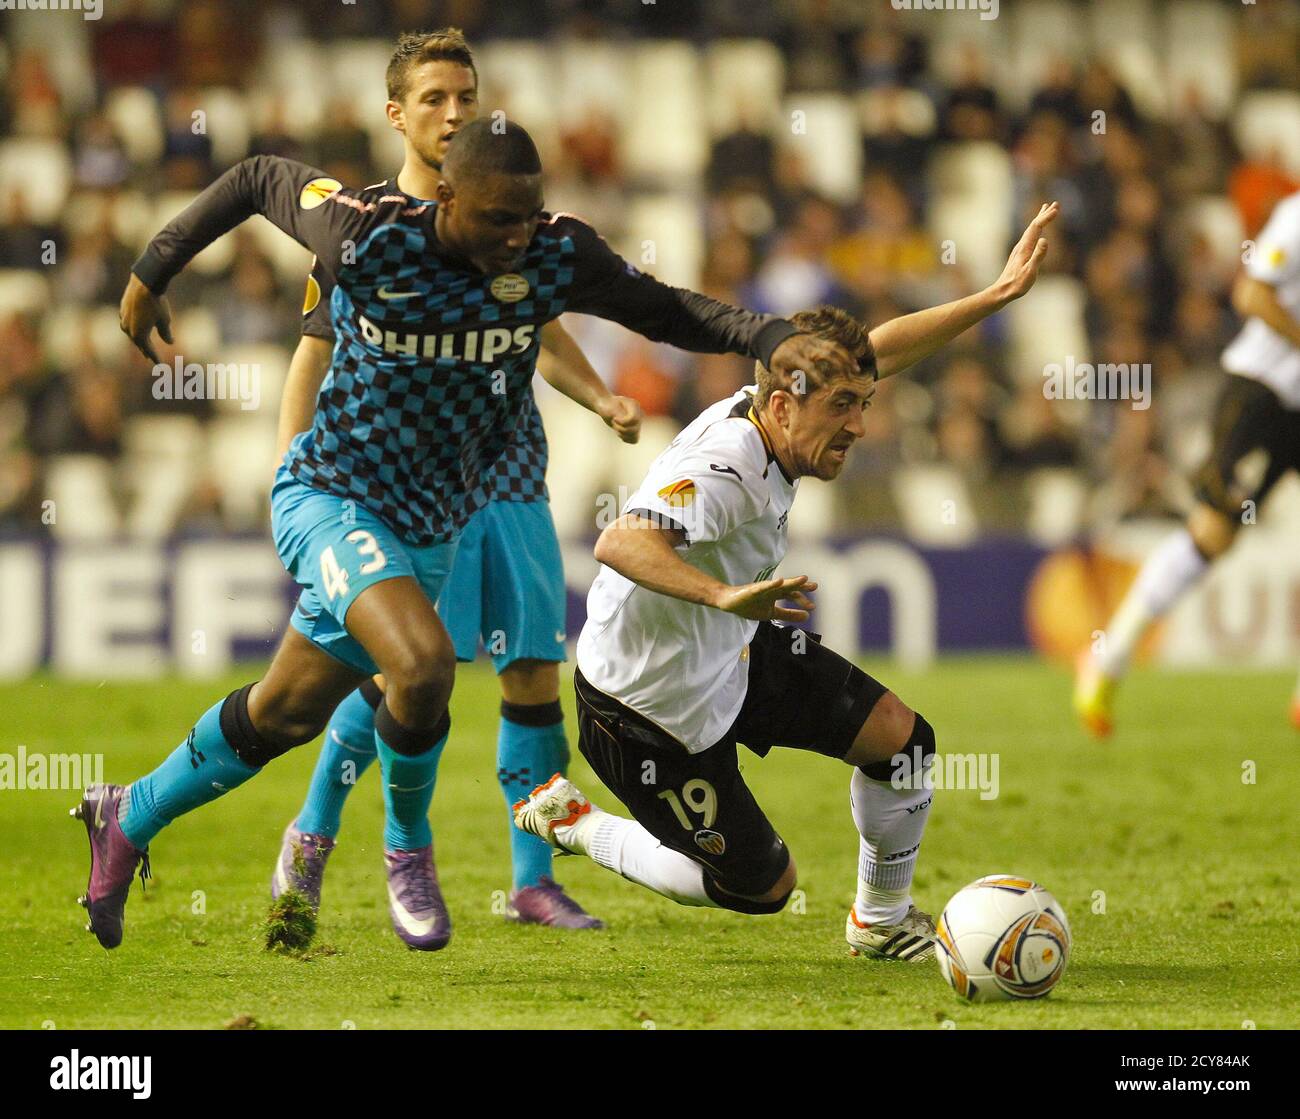 Pablo hernandez valencia hi-res stock photography and images - Page 2 -  Alamy